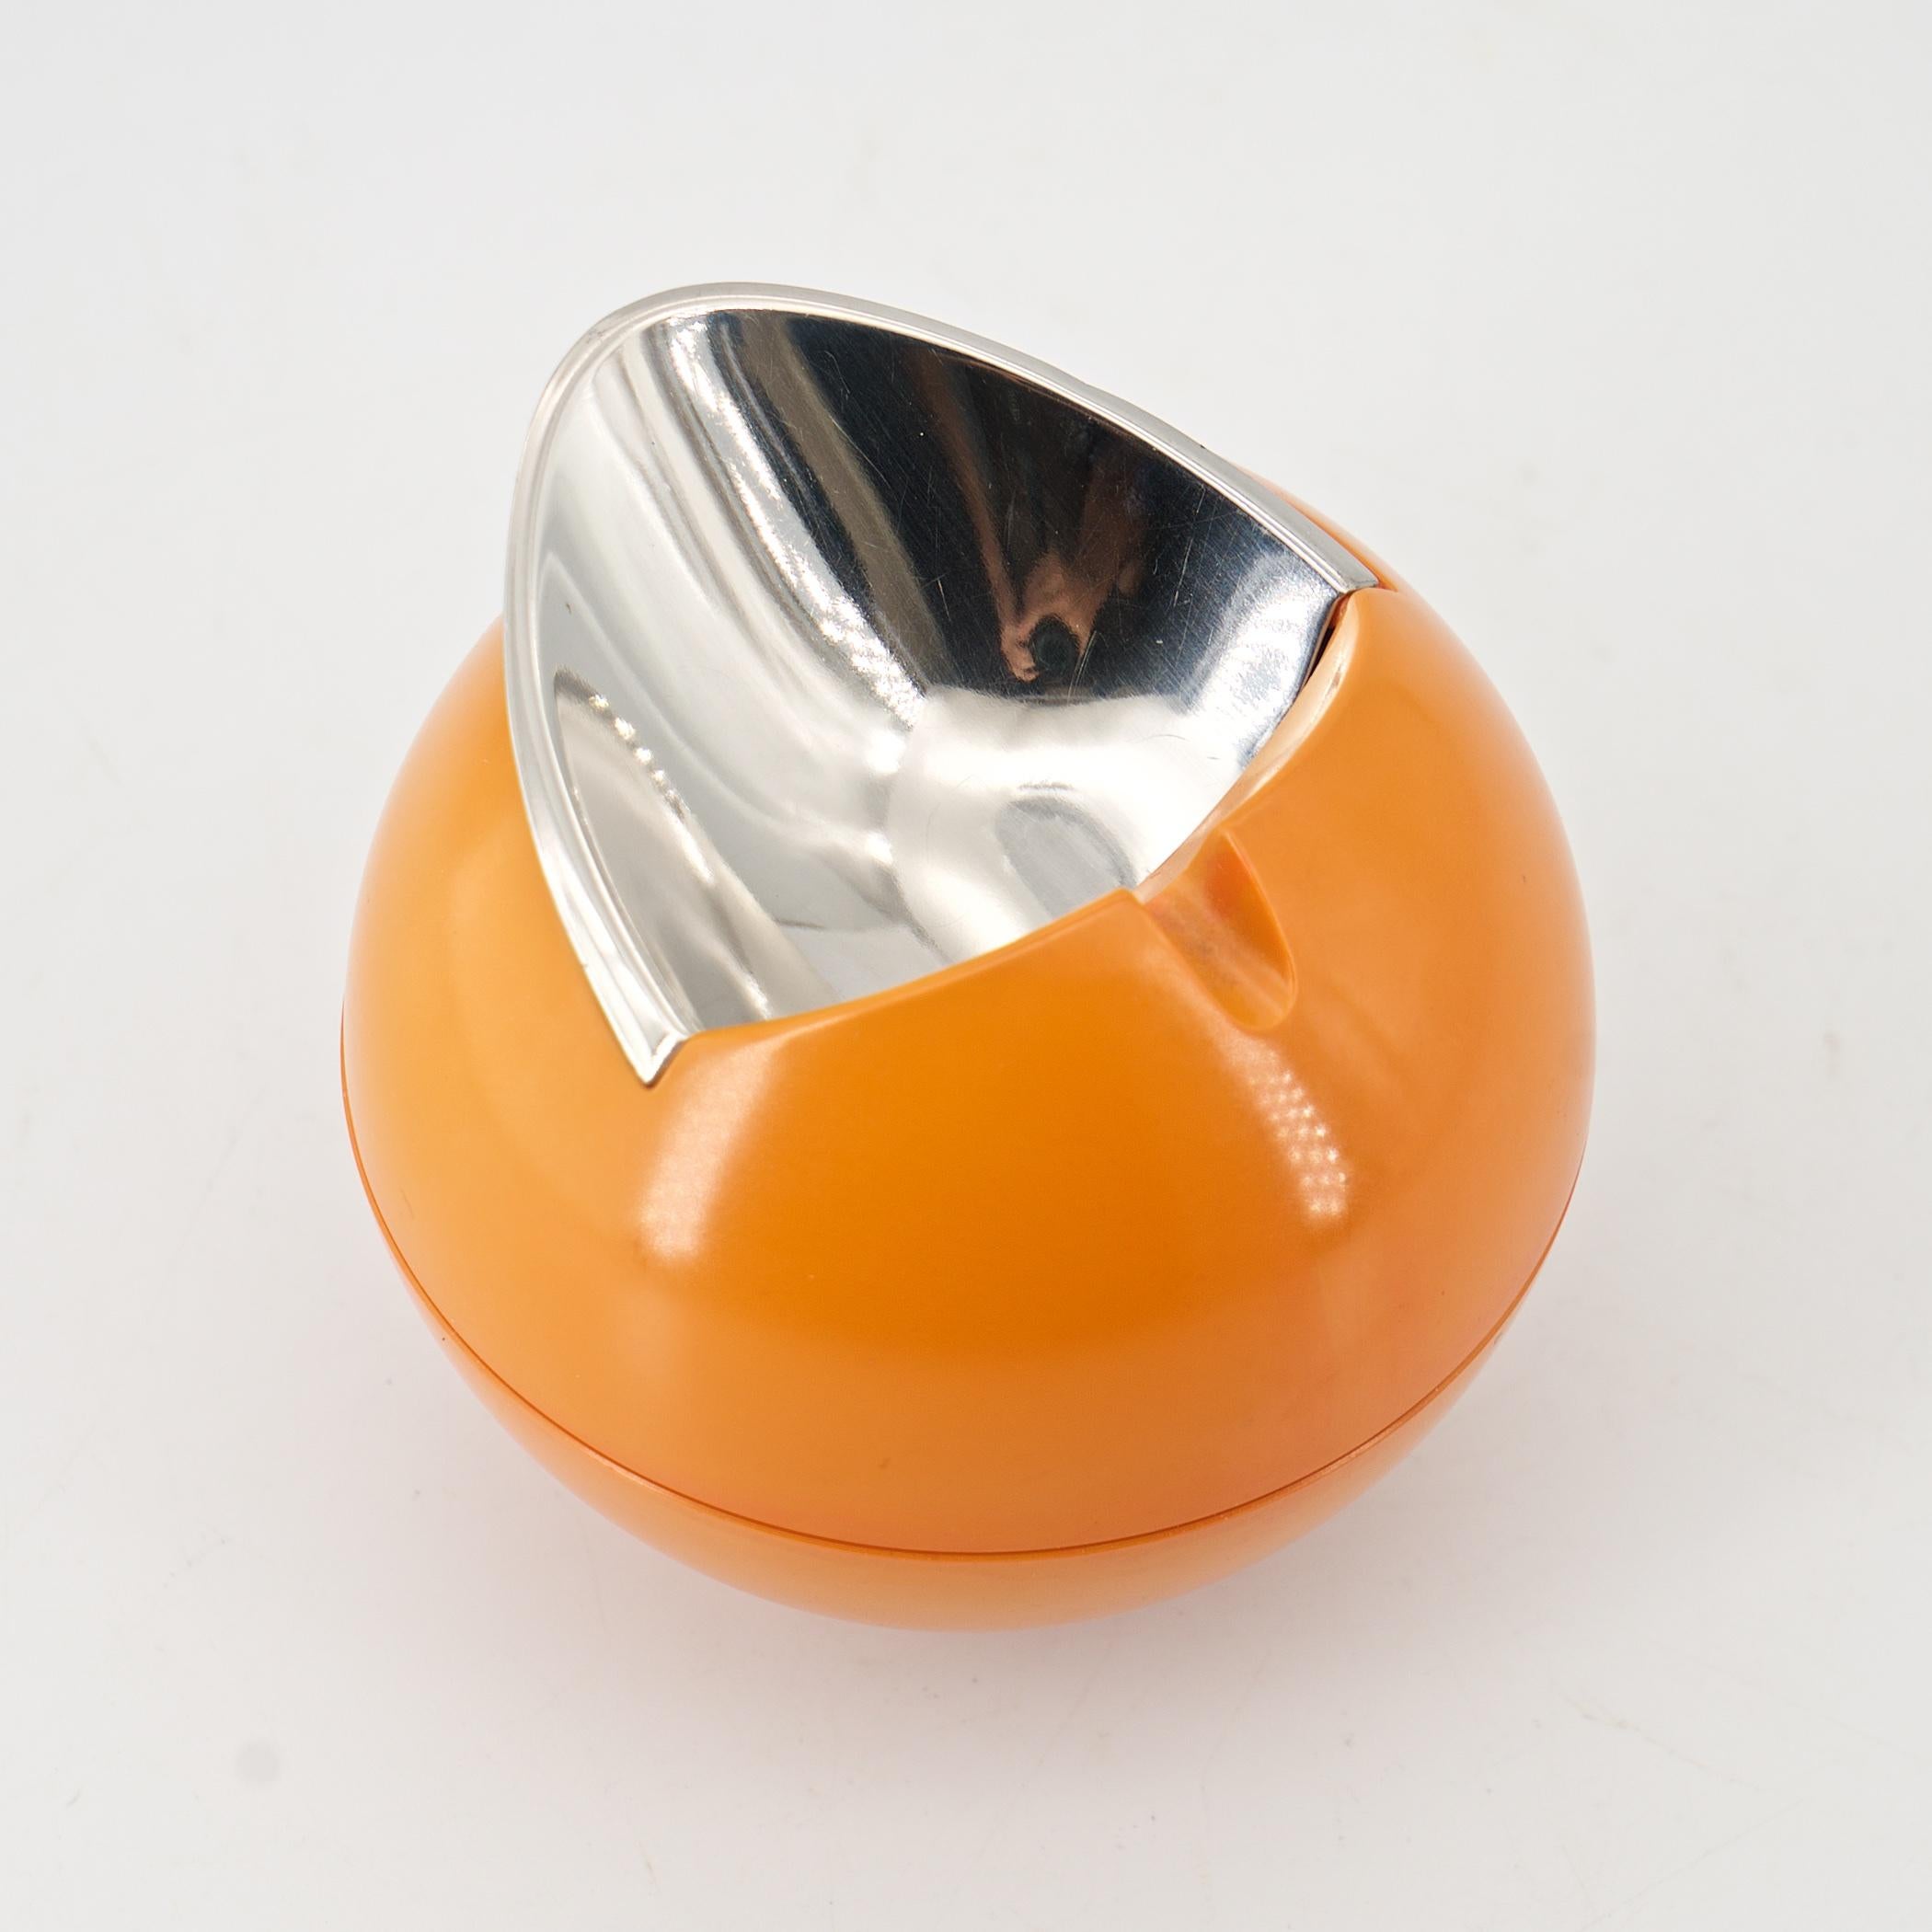 Machine-Made 1960s Orb Ashtray Mod Psychedelic Orange Mid-Century Plastic + Steel Sculpture For Sale